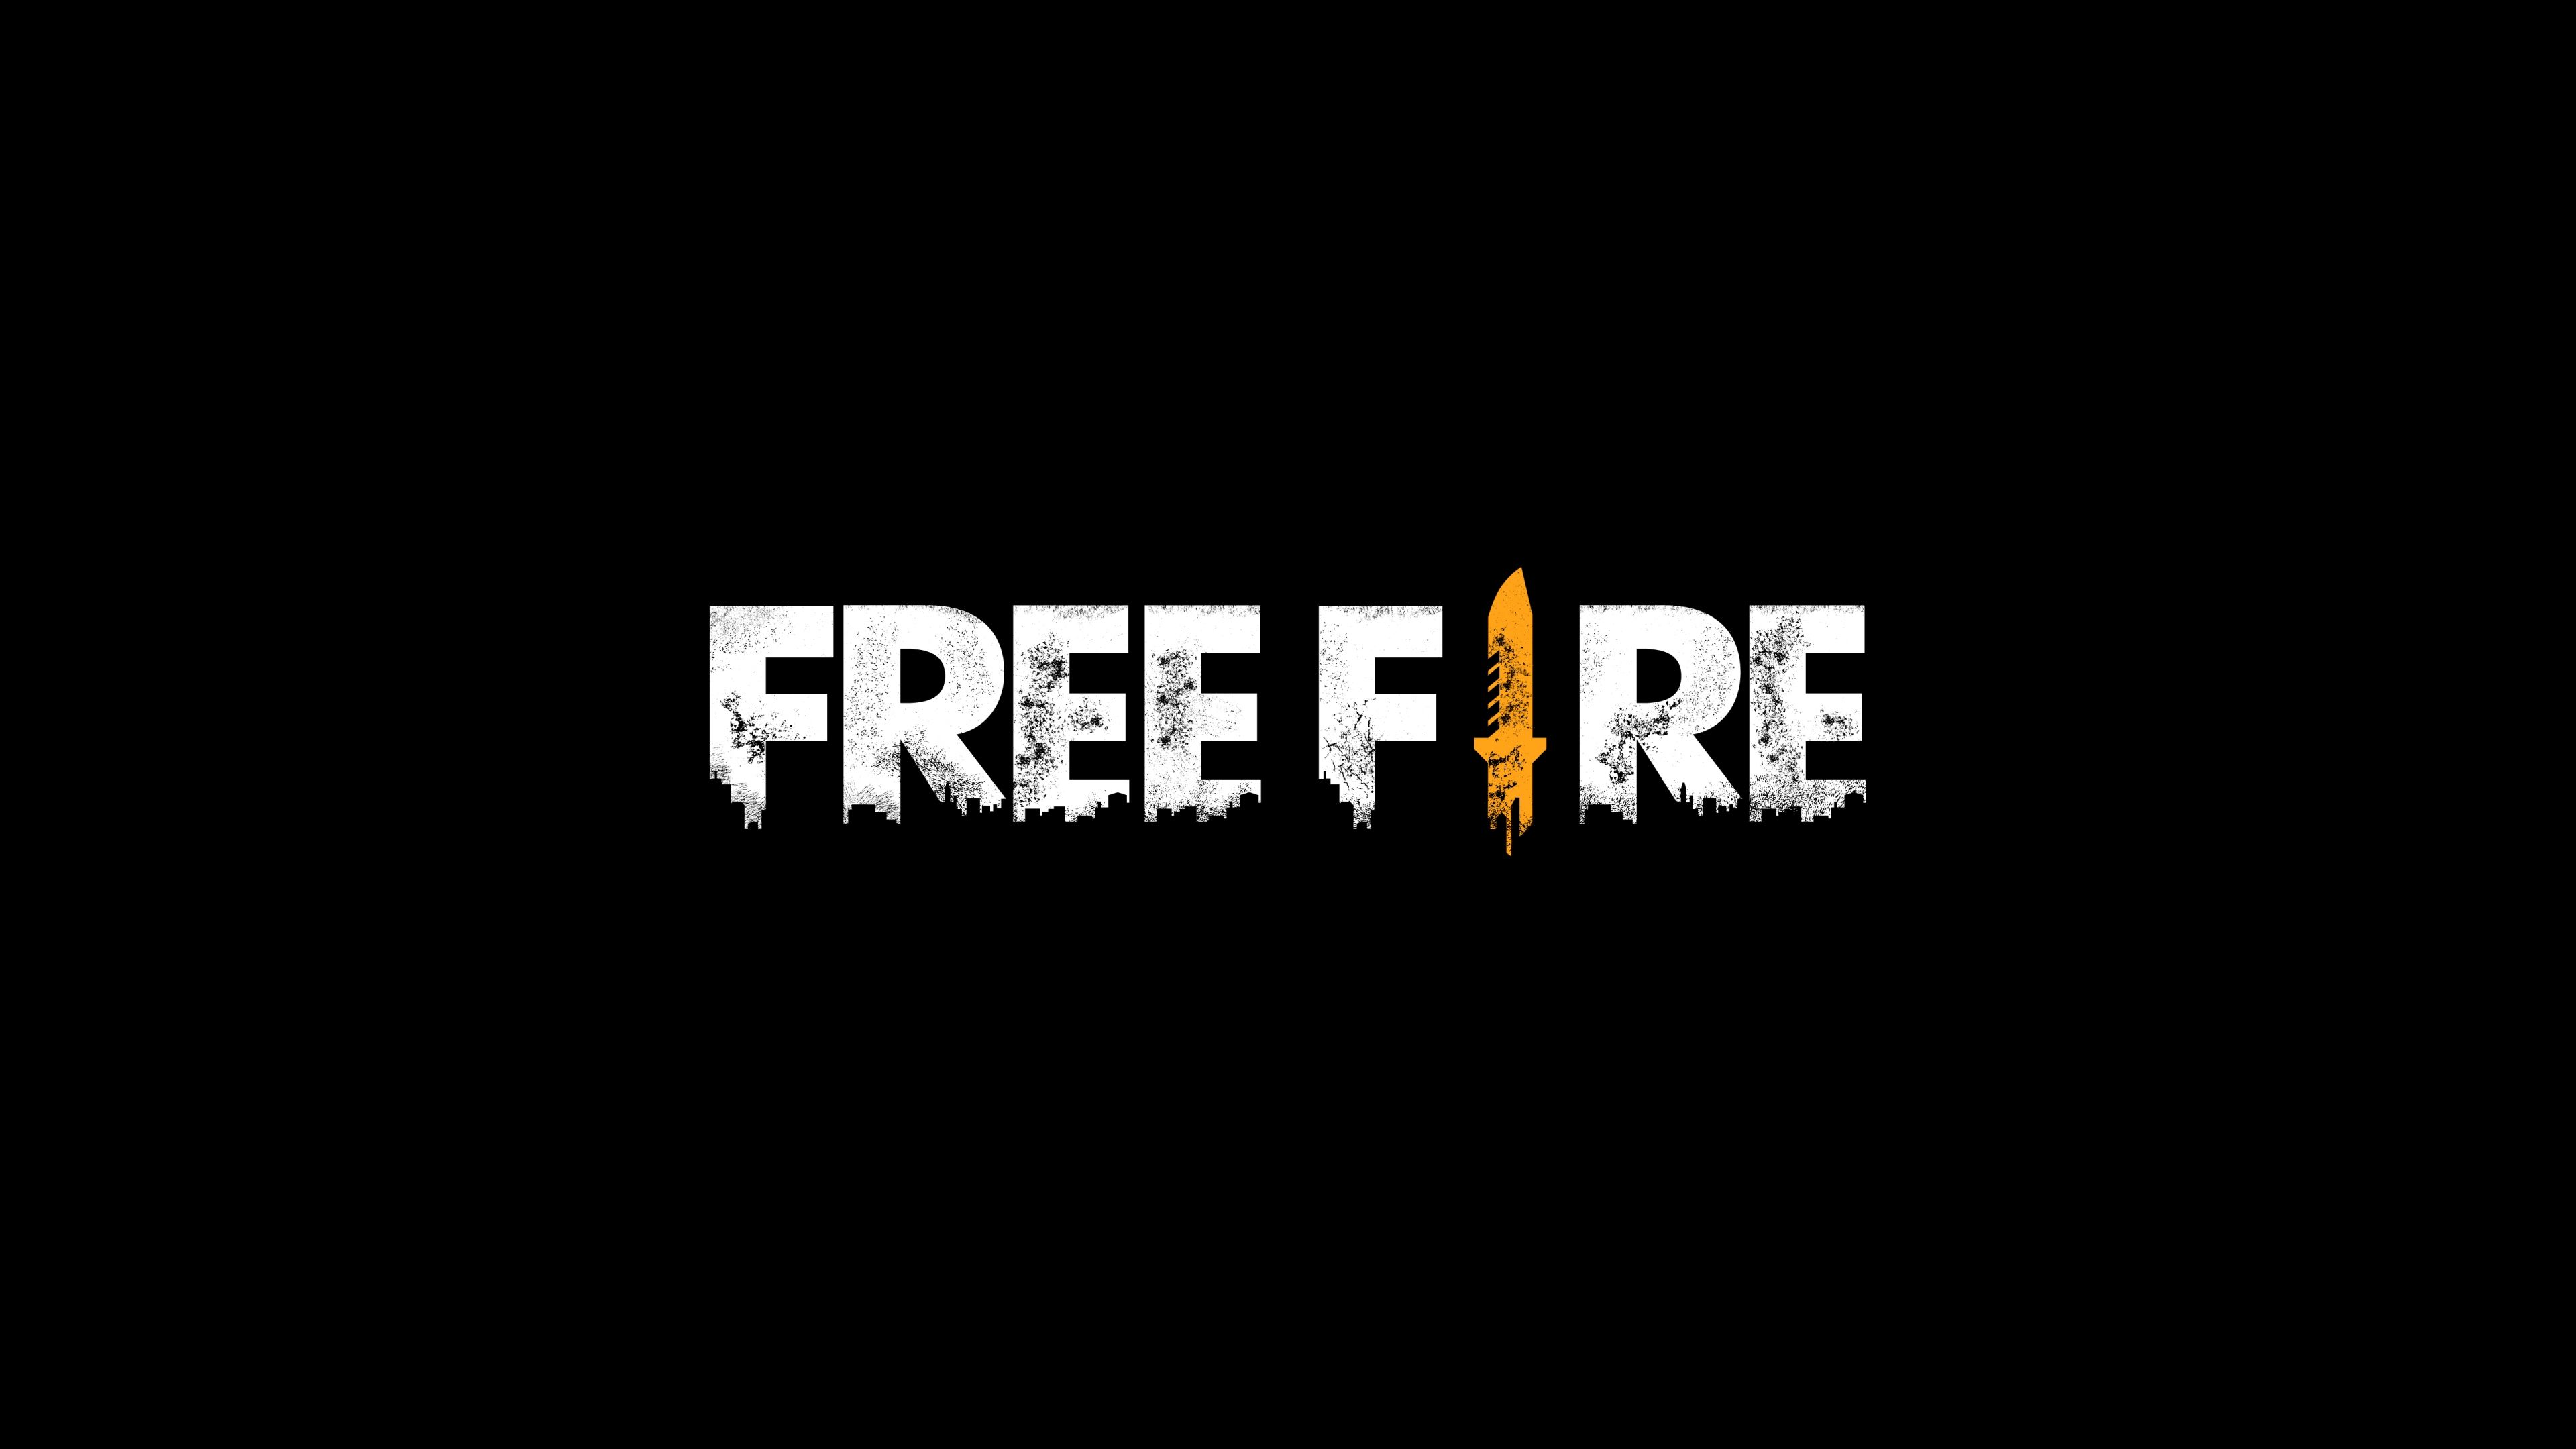  Free  Fire  Heroic Wallpapers  Wallpaper  Cave